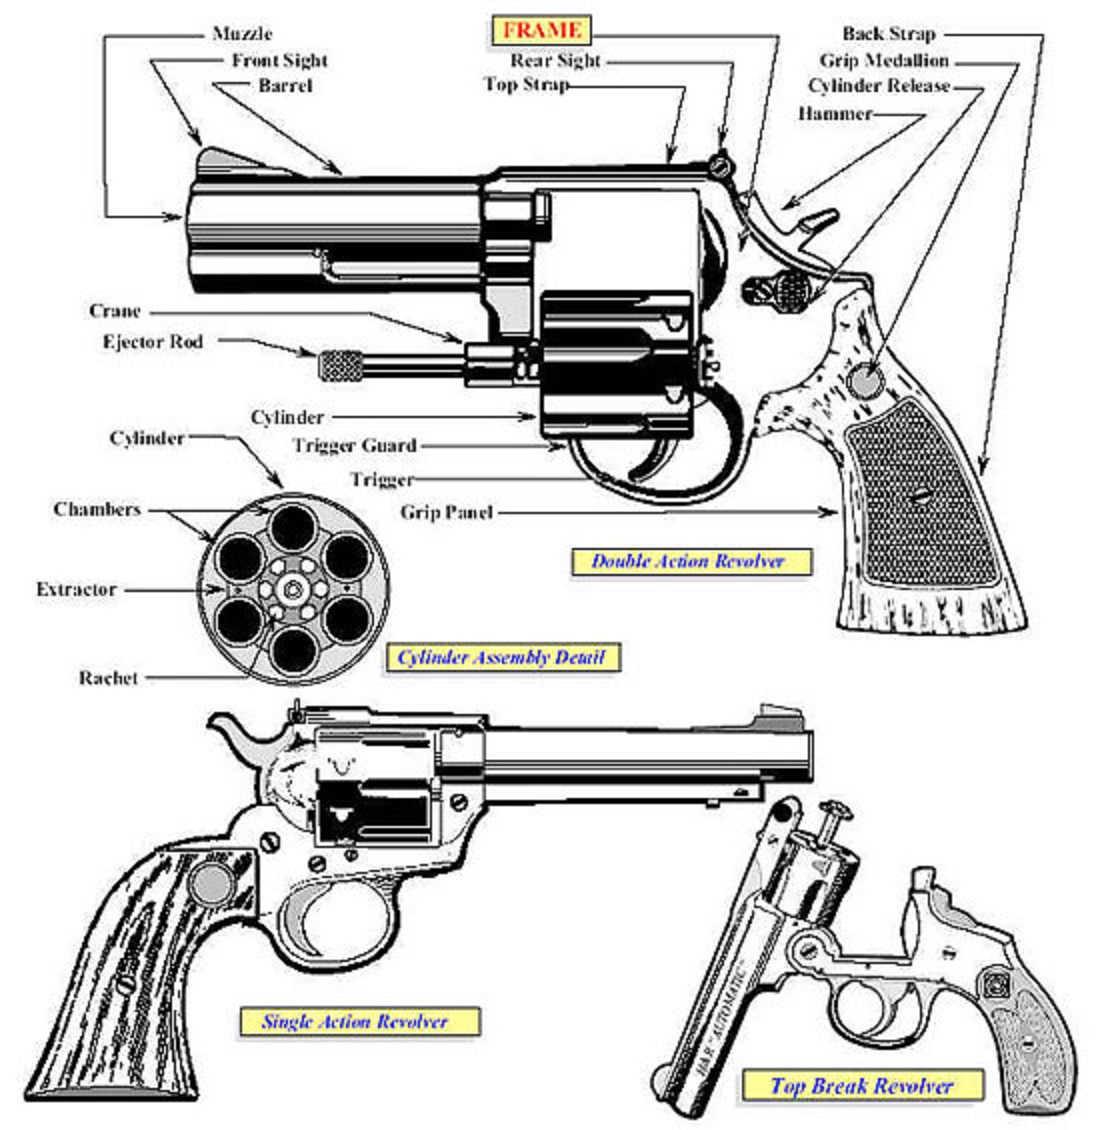 Image (large) of an illustration showing the primary characteristics exhibited in the Revolver category.  Items such as the frame; cylinder assembly details; and images of single, double, and top break revolvers.   